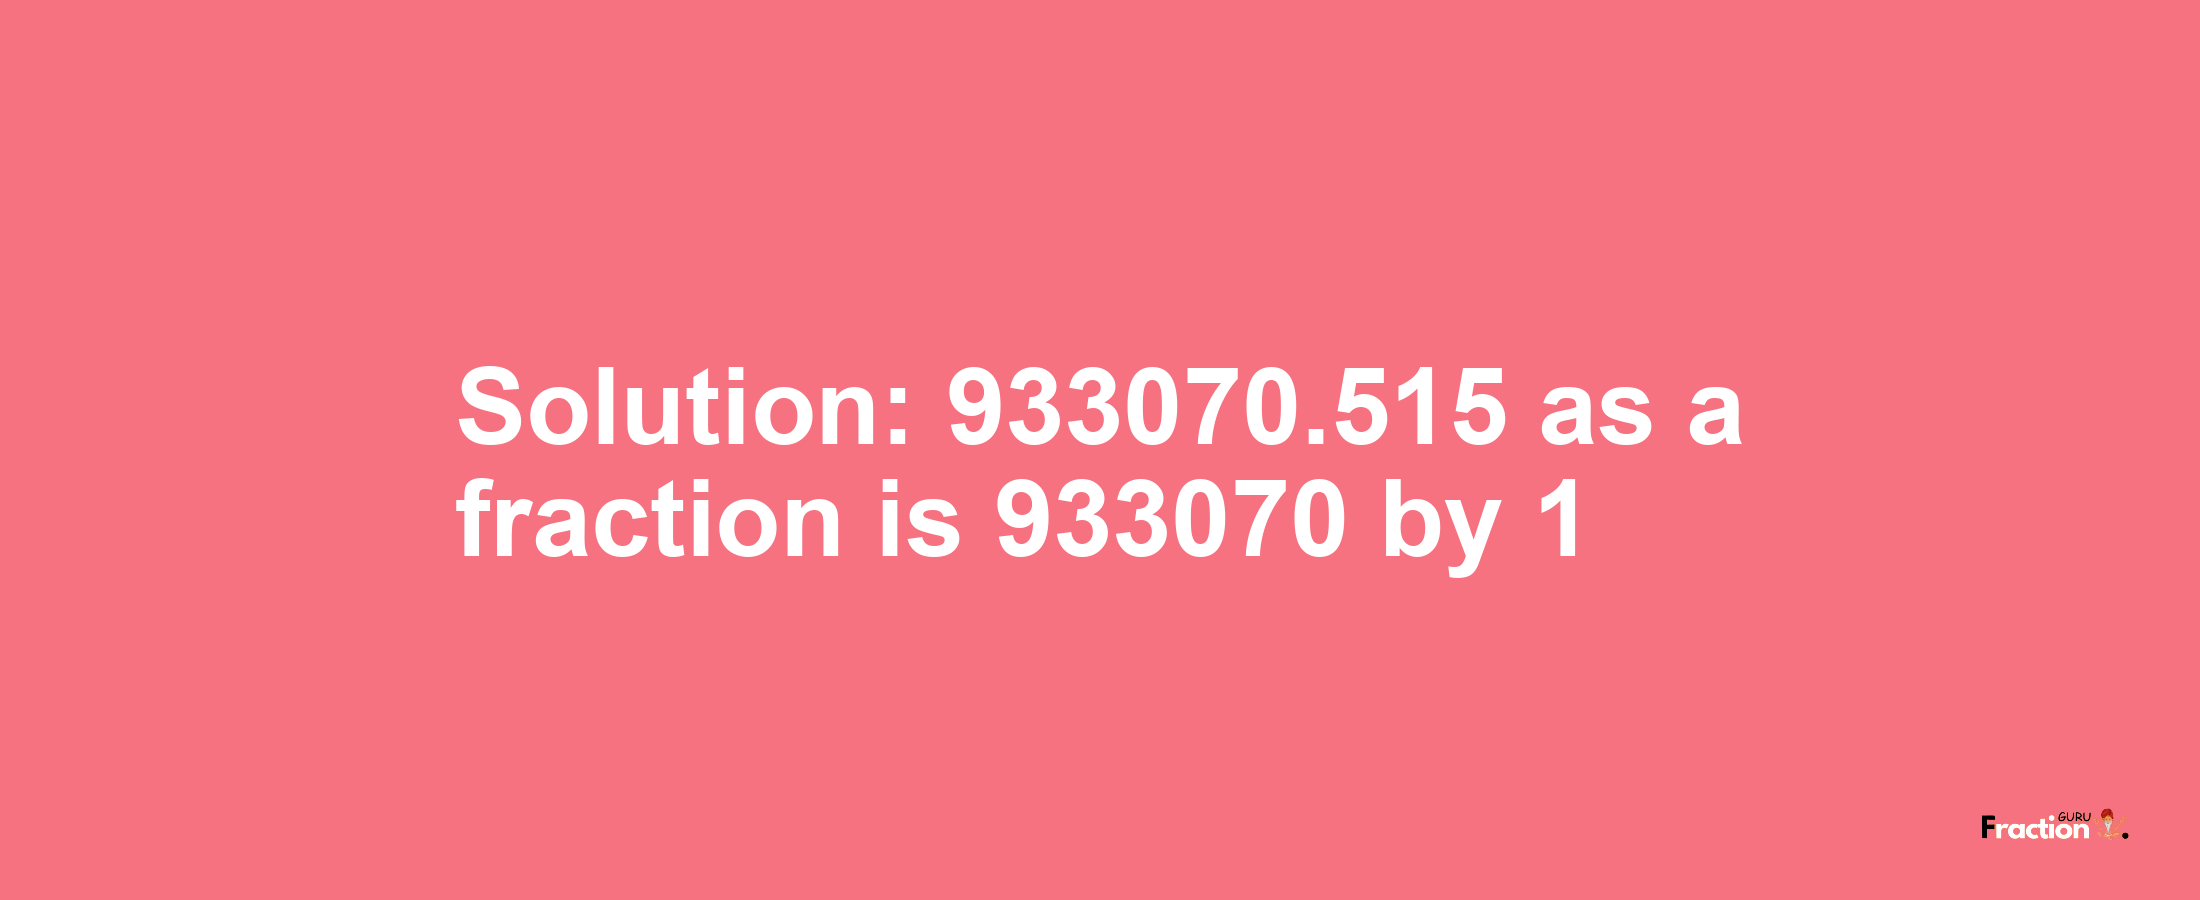 Solution:933070.515 as a fraction is 933070/1